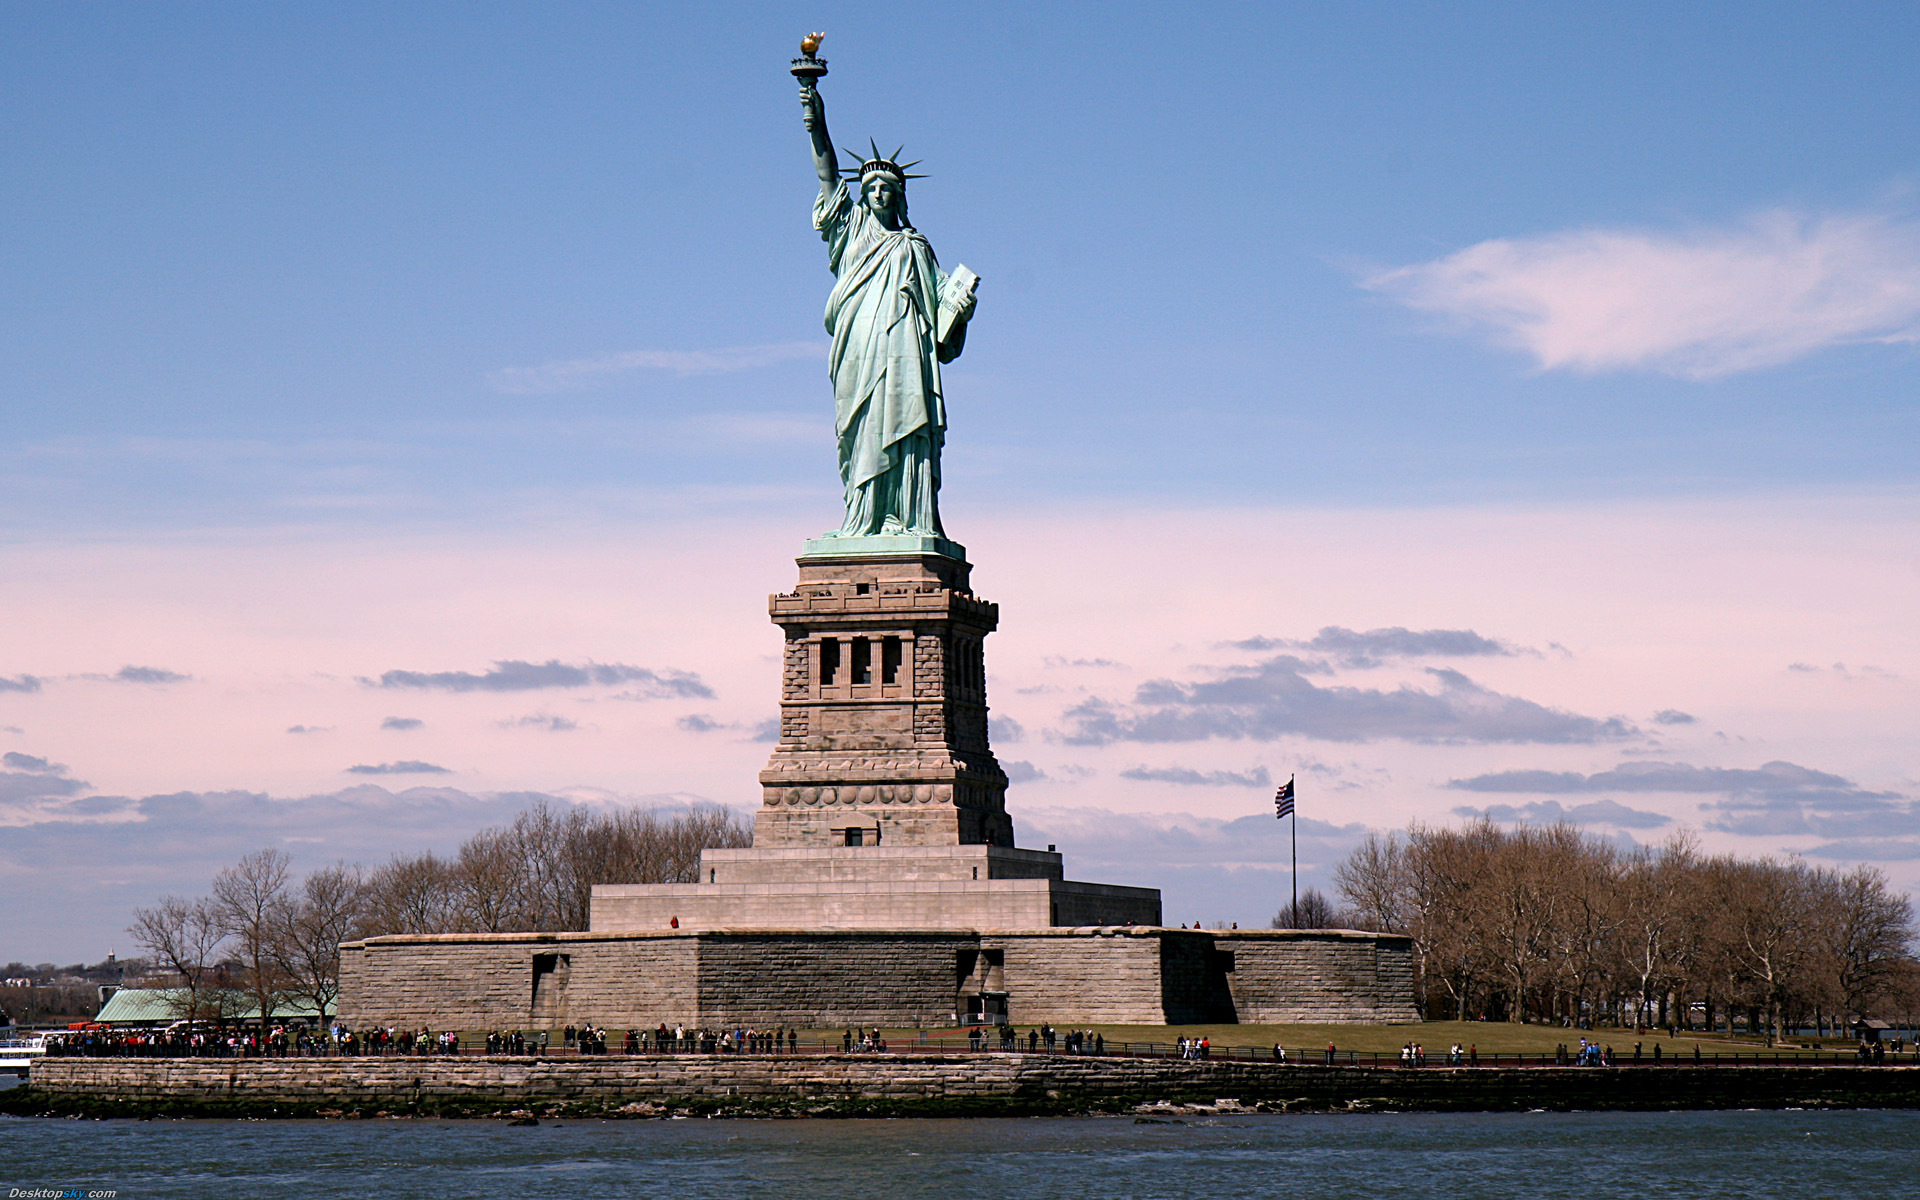 Statue Of Liberty 151 ft